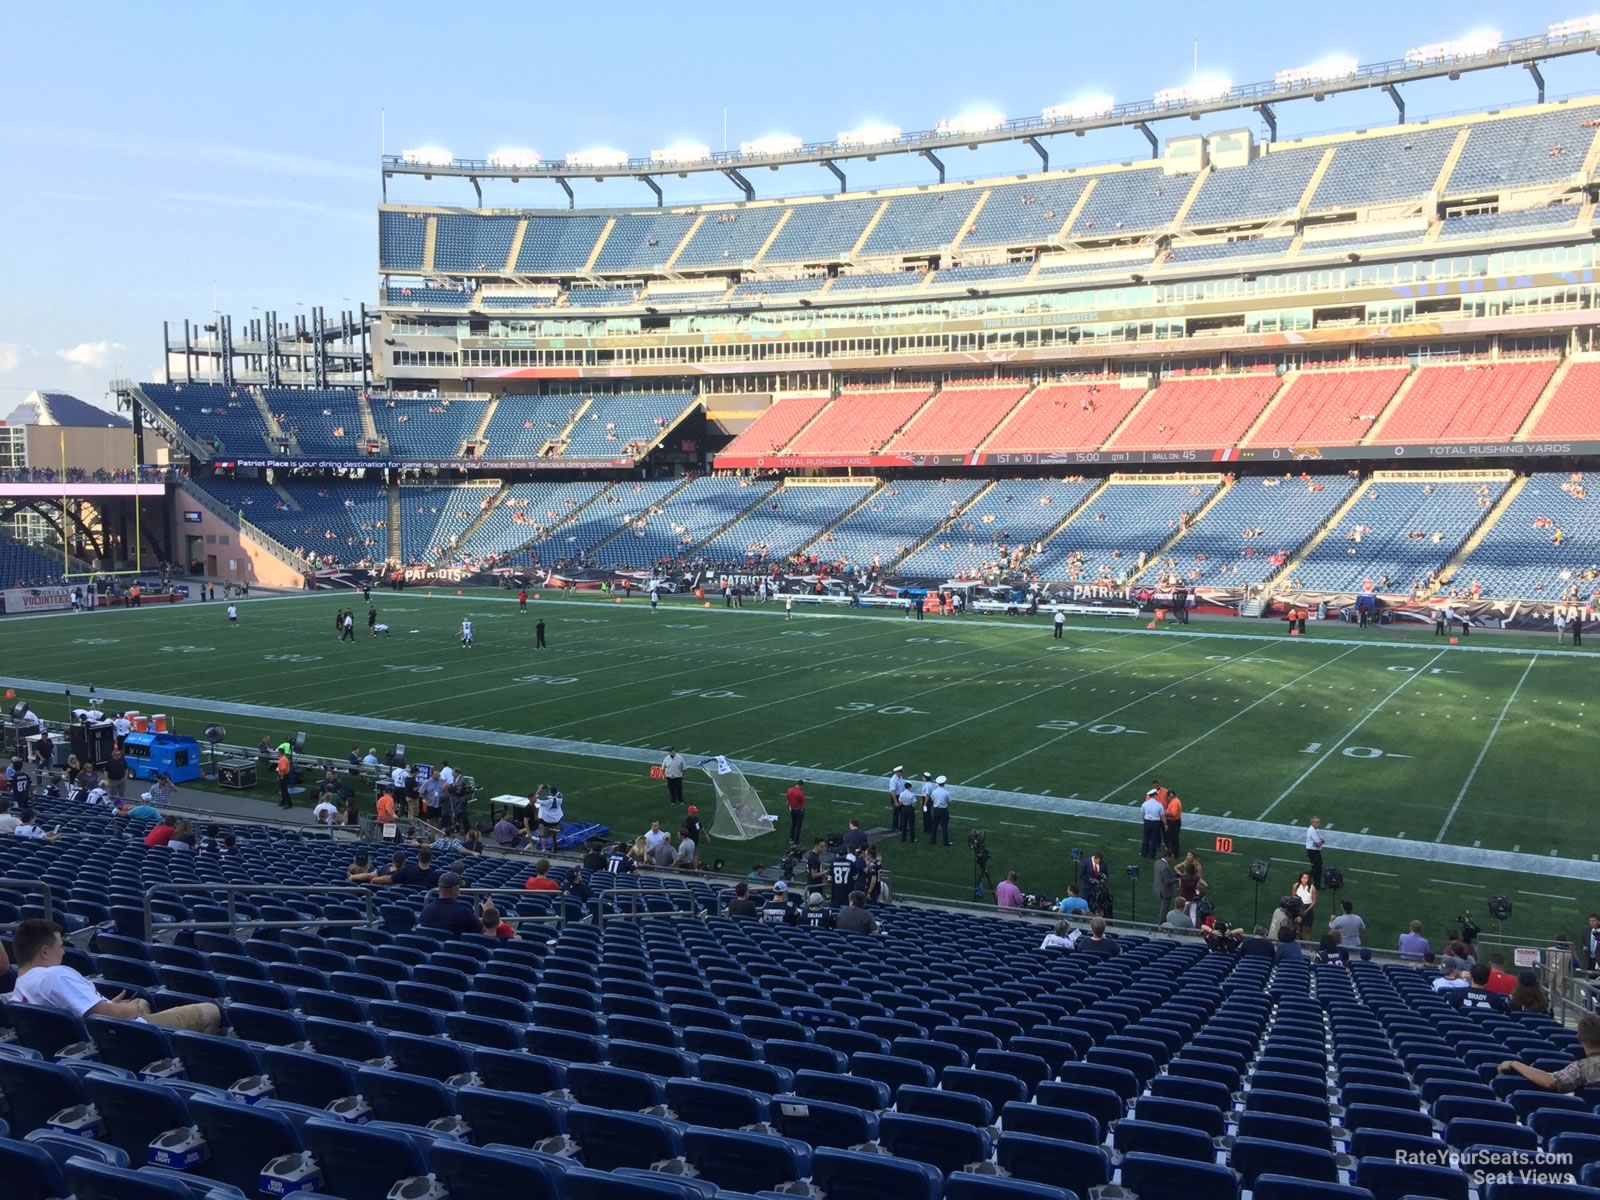 section 128, row 29 seat view  for football - gillette stadium